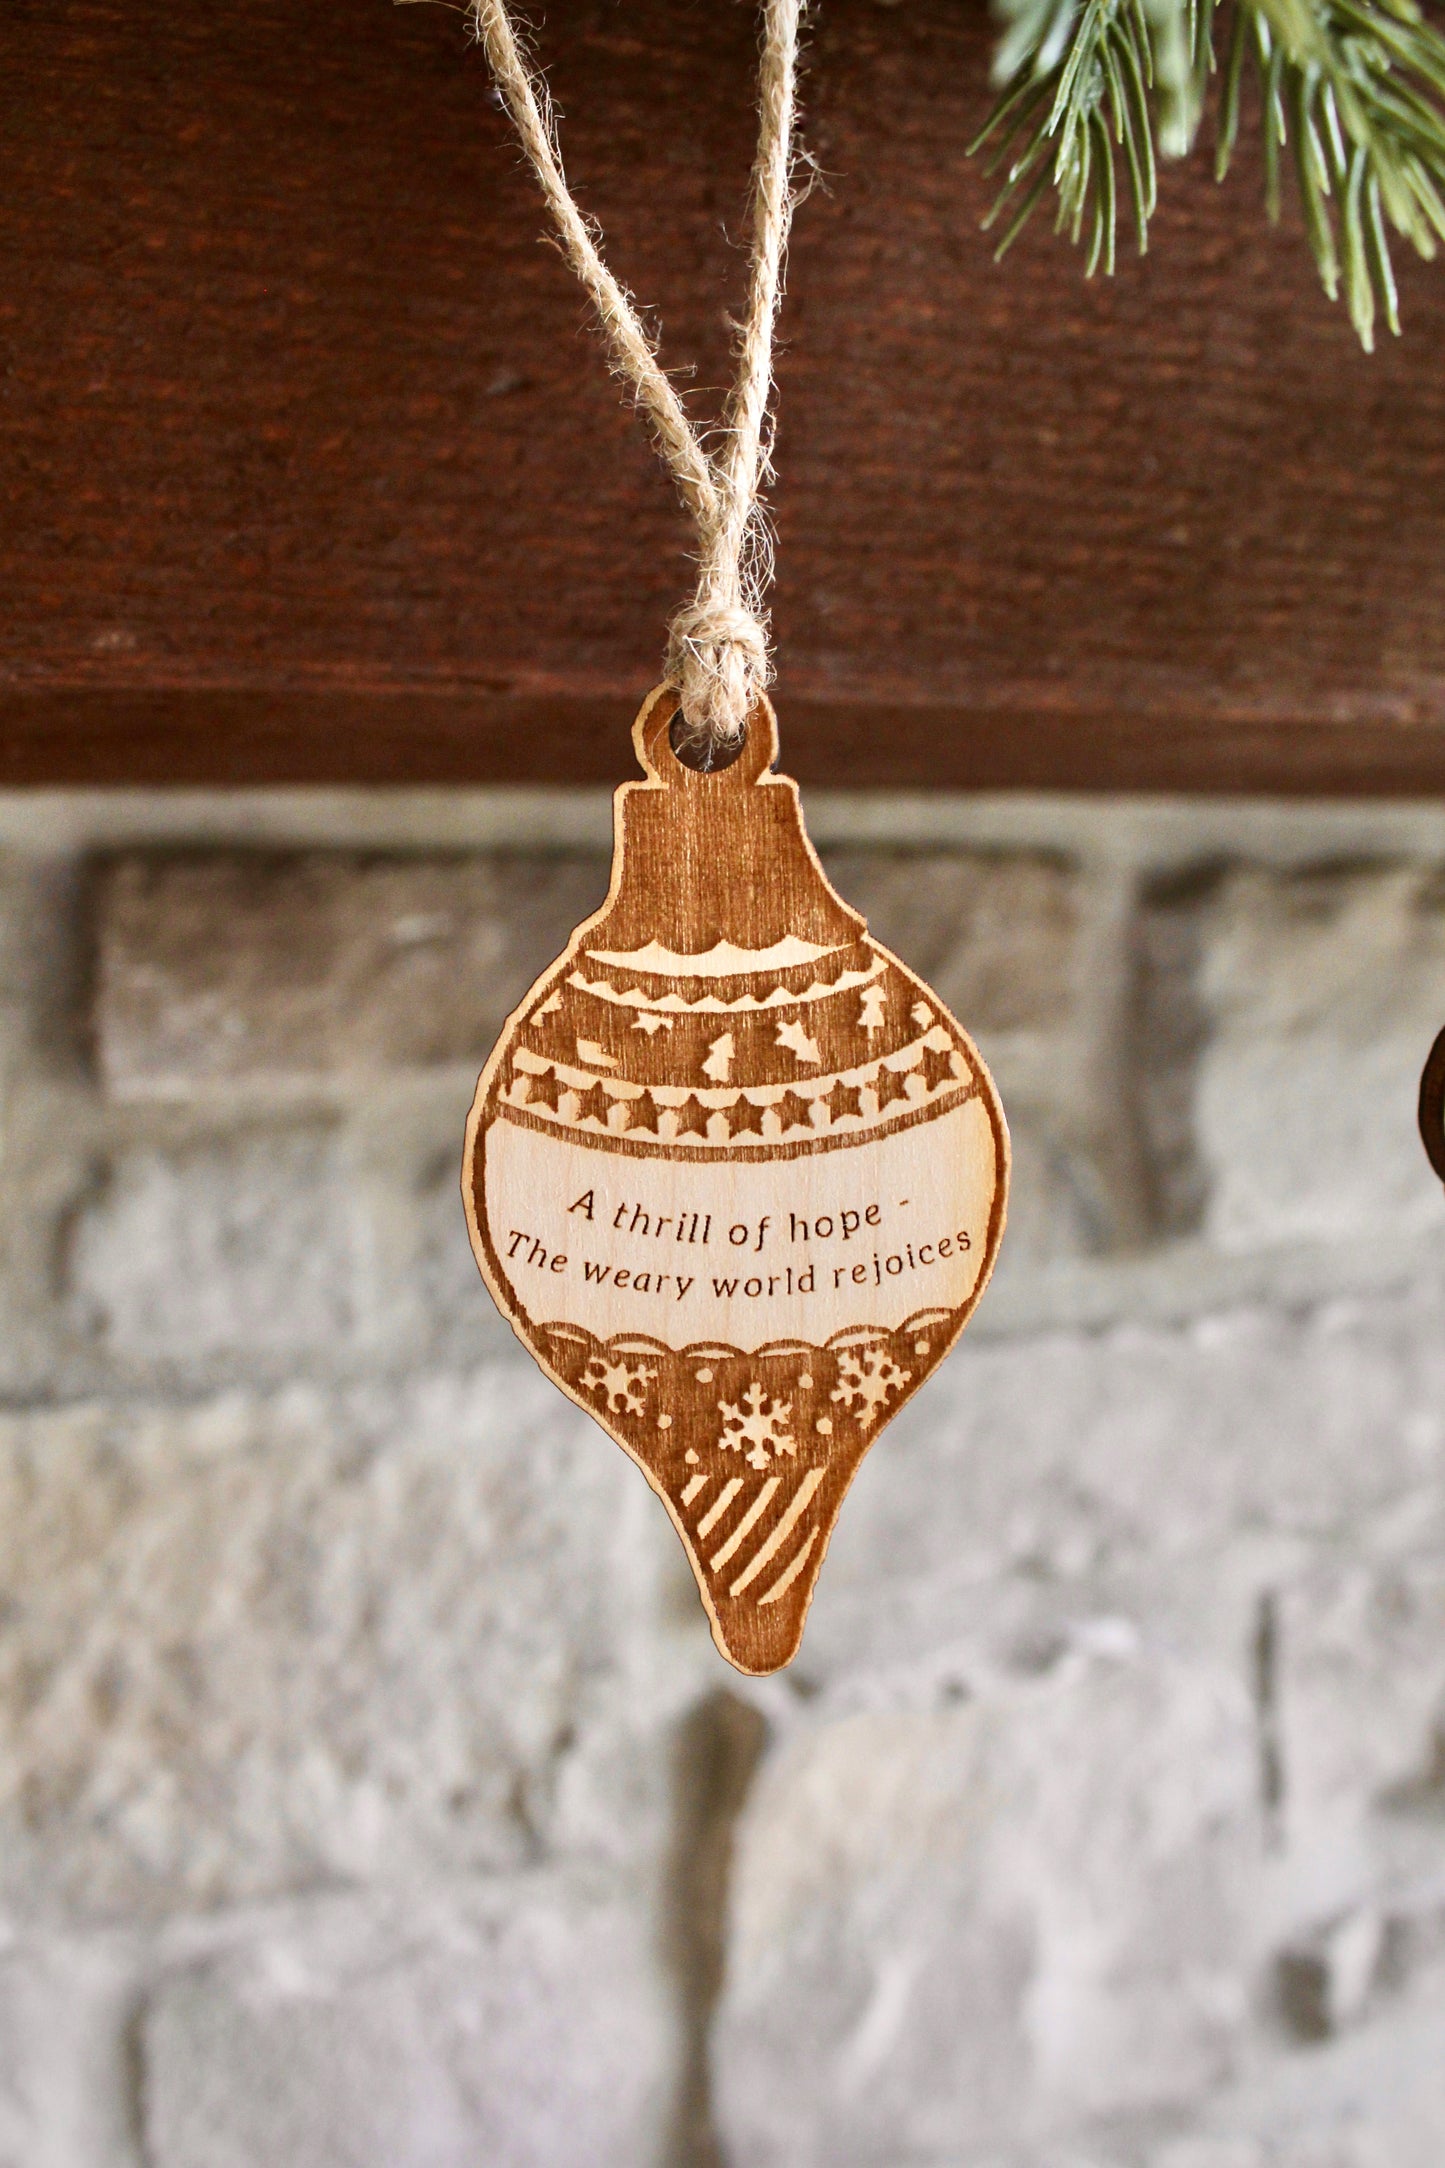 A Thrill of Hope | Wooden Ornament